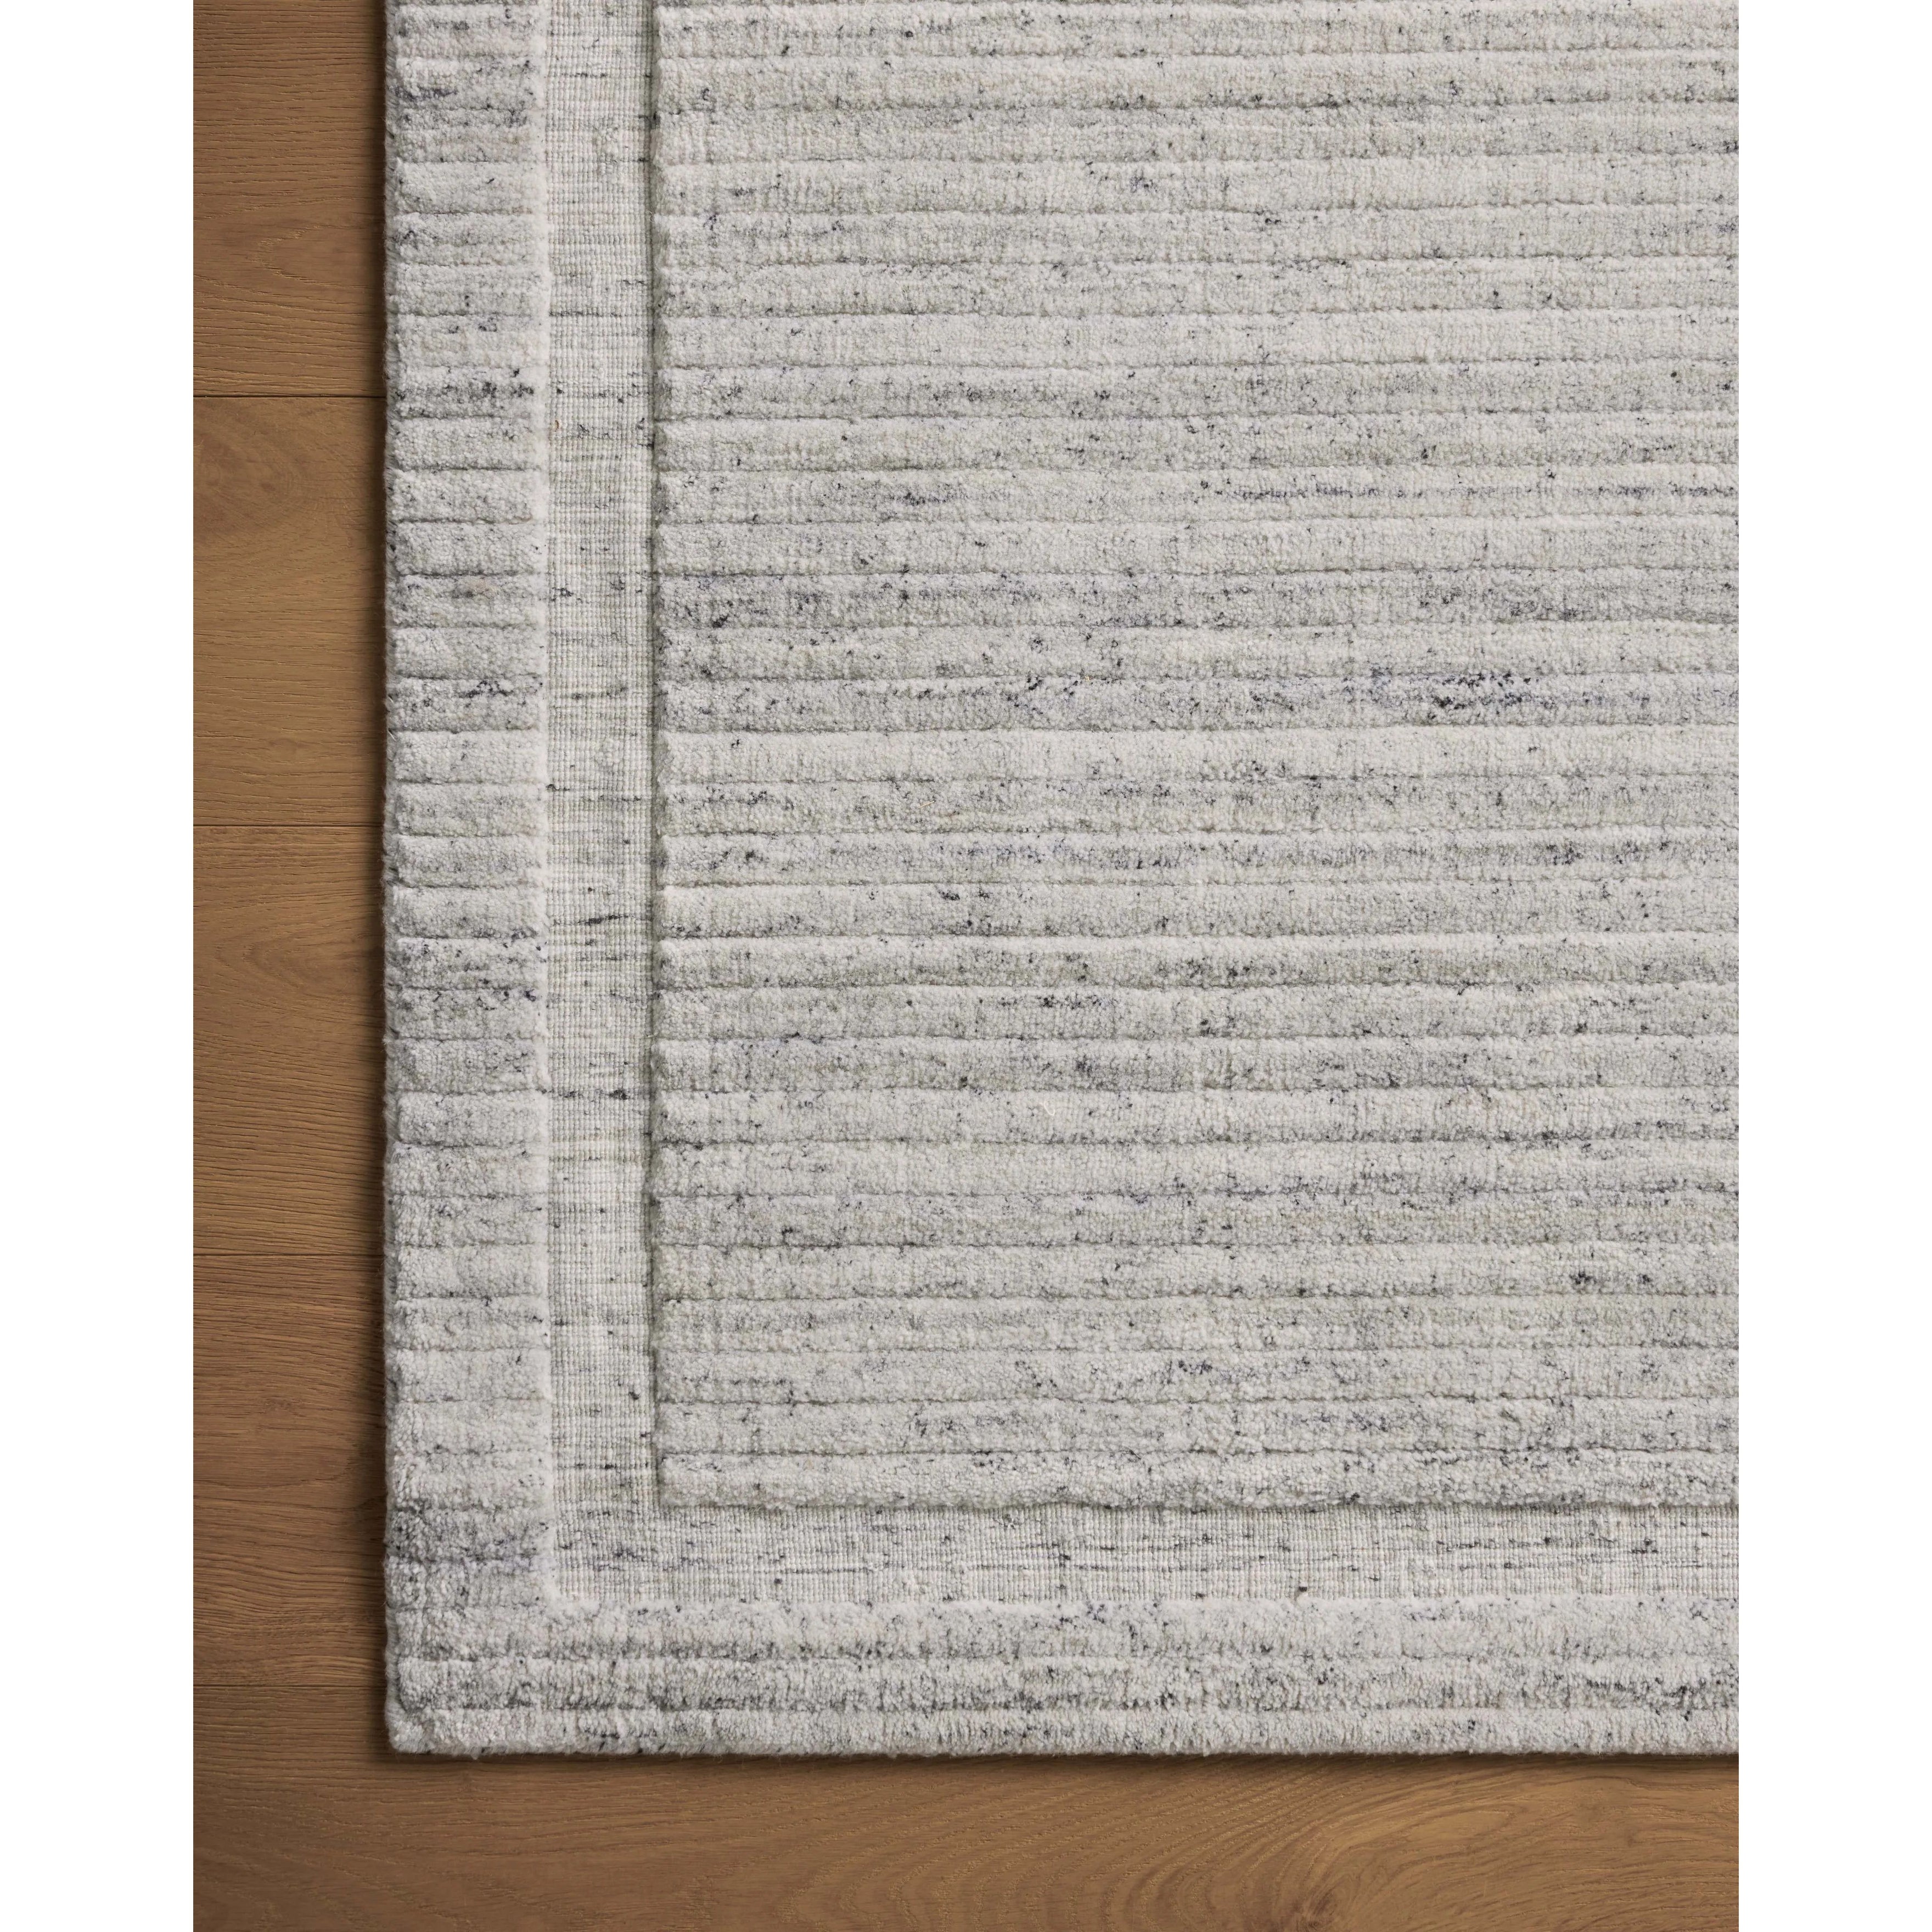 Irresistible to walk upon, the Dana Stone Rug by Brigette Romanek x Loloi has a high-low texture that alternates between a subtly shaggy pile and a soft base. Horizontal broken stripes give the area rug a fresh and energized structure, while a finish of fringe along the edges accentuates its sense of movement. Amethyst Home provides interior design, new home construction design consulting, vintage area rugs, and lighting in the Scottsdale metro area.